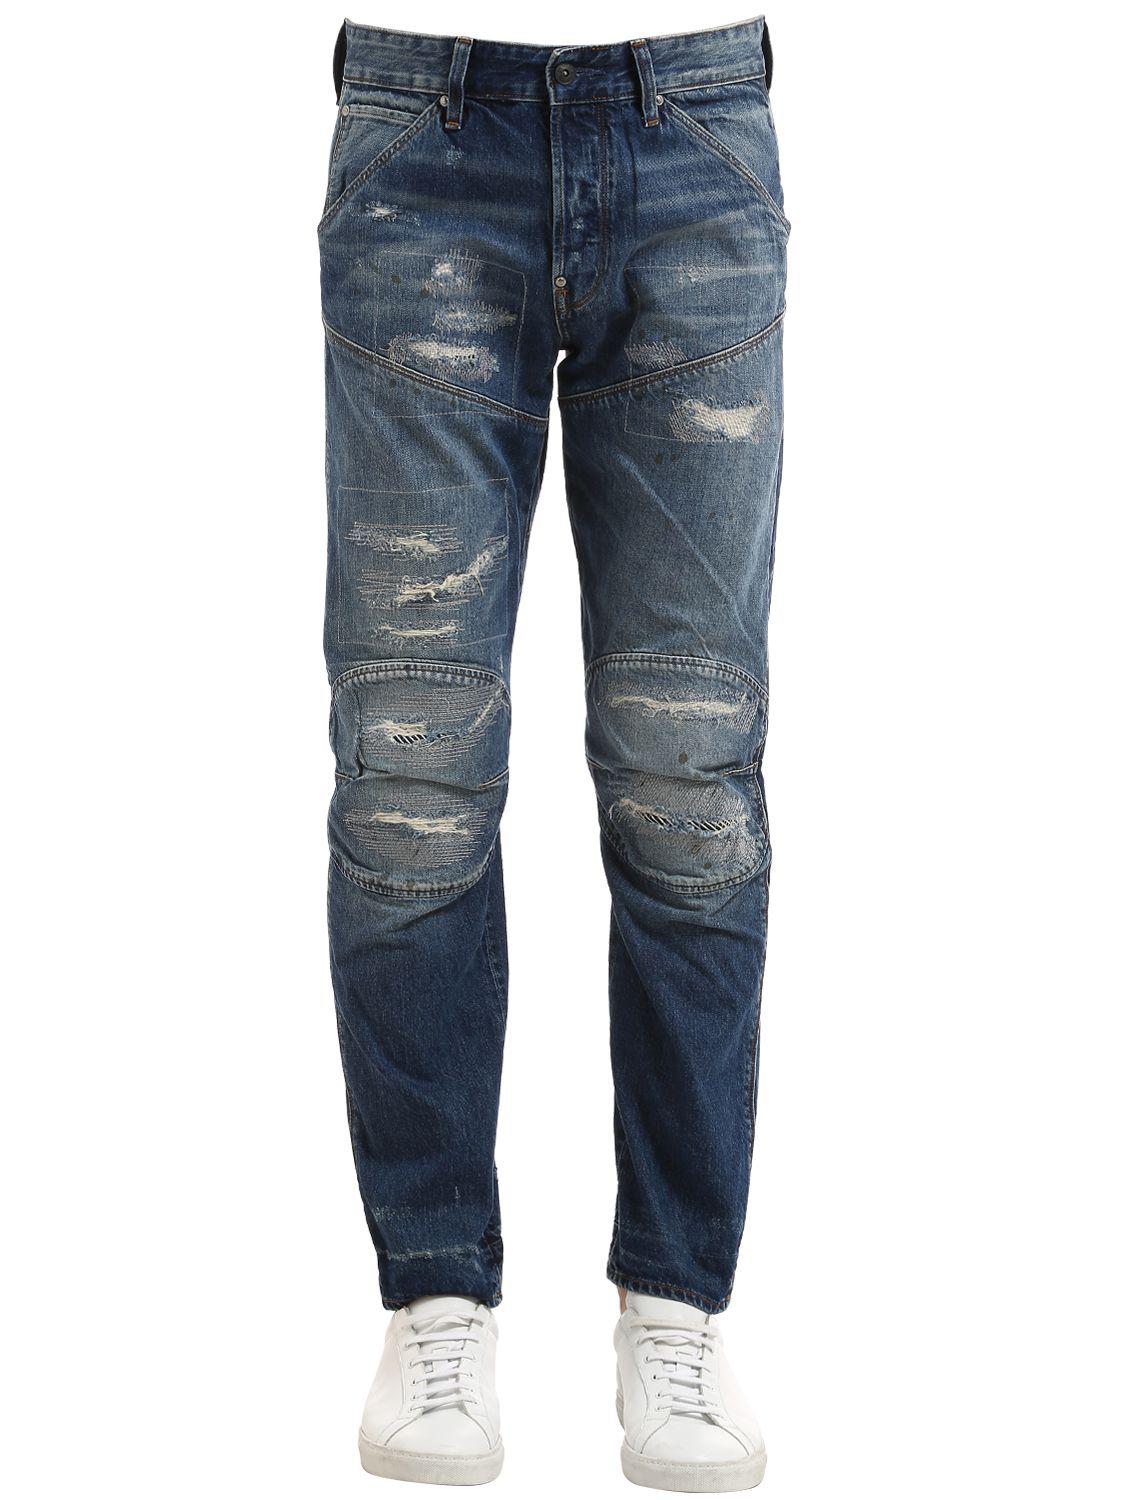 G-Star RAW 5620 3d Restored Ripped Denim Jeans in Blue for Men - Lyst